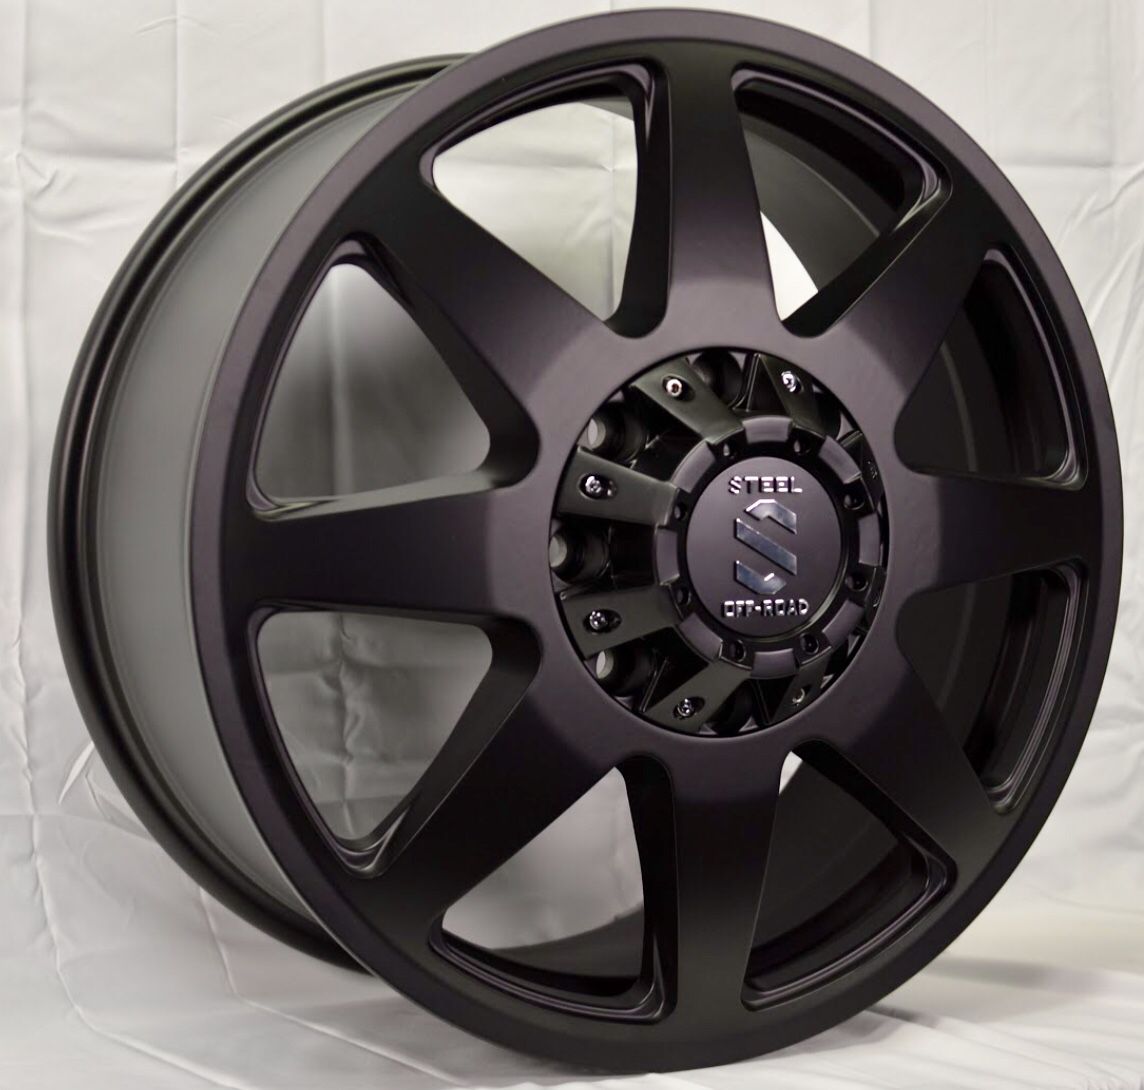 Dually wheels in stock no wait time!!!!